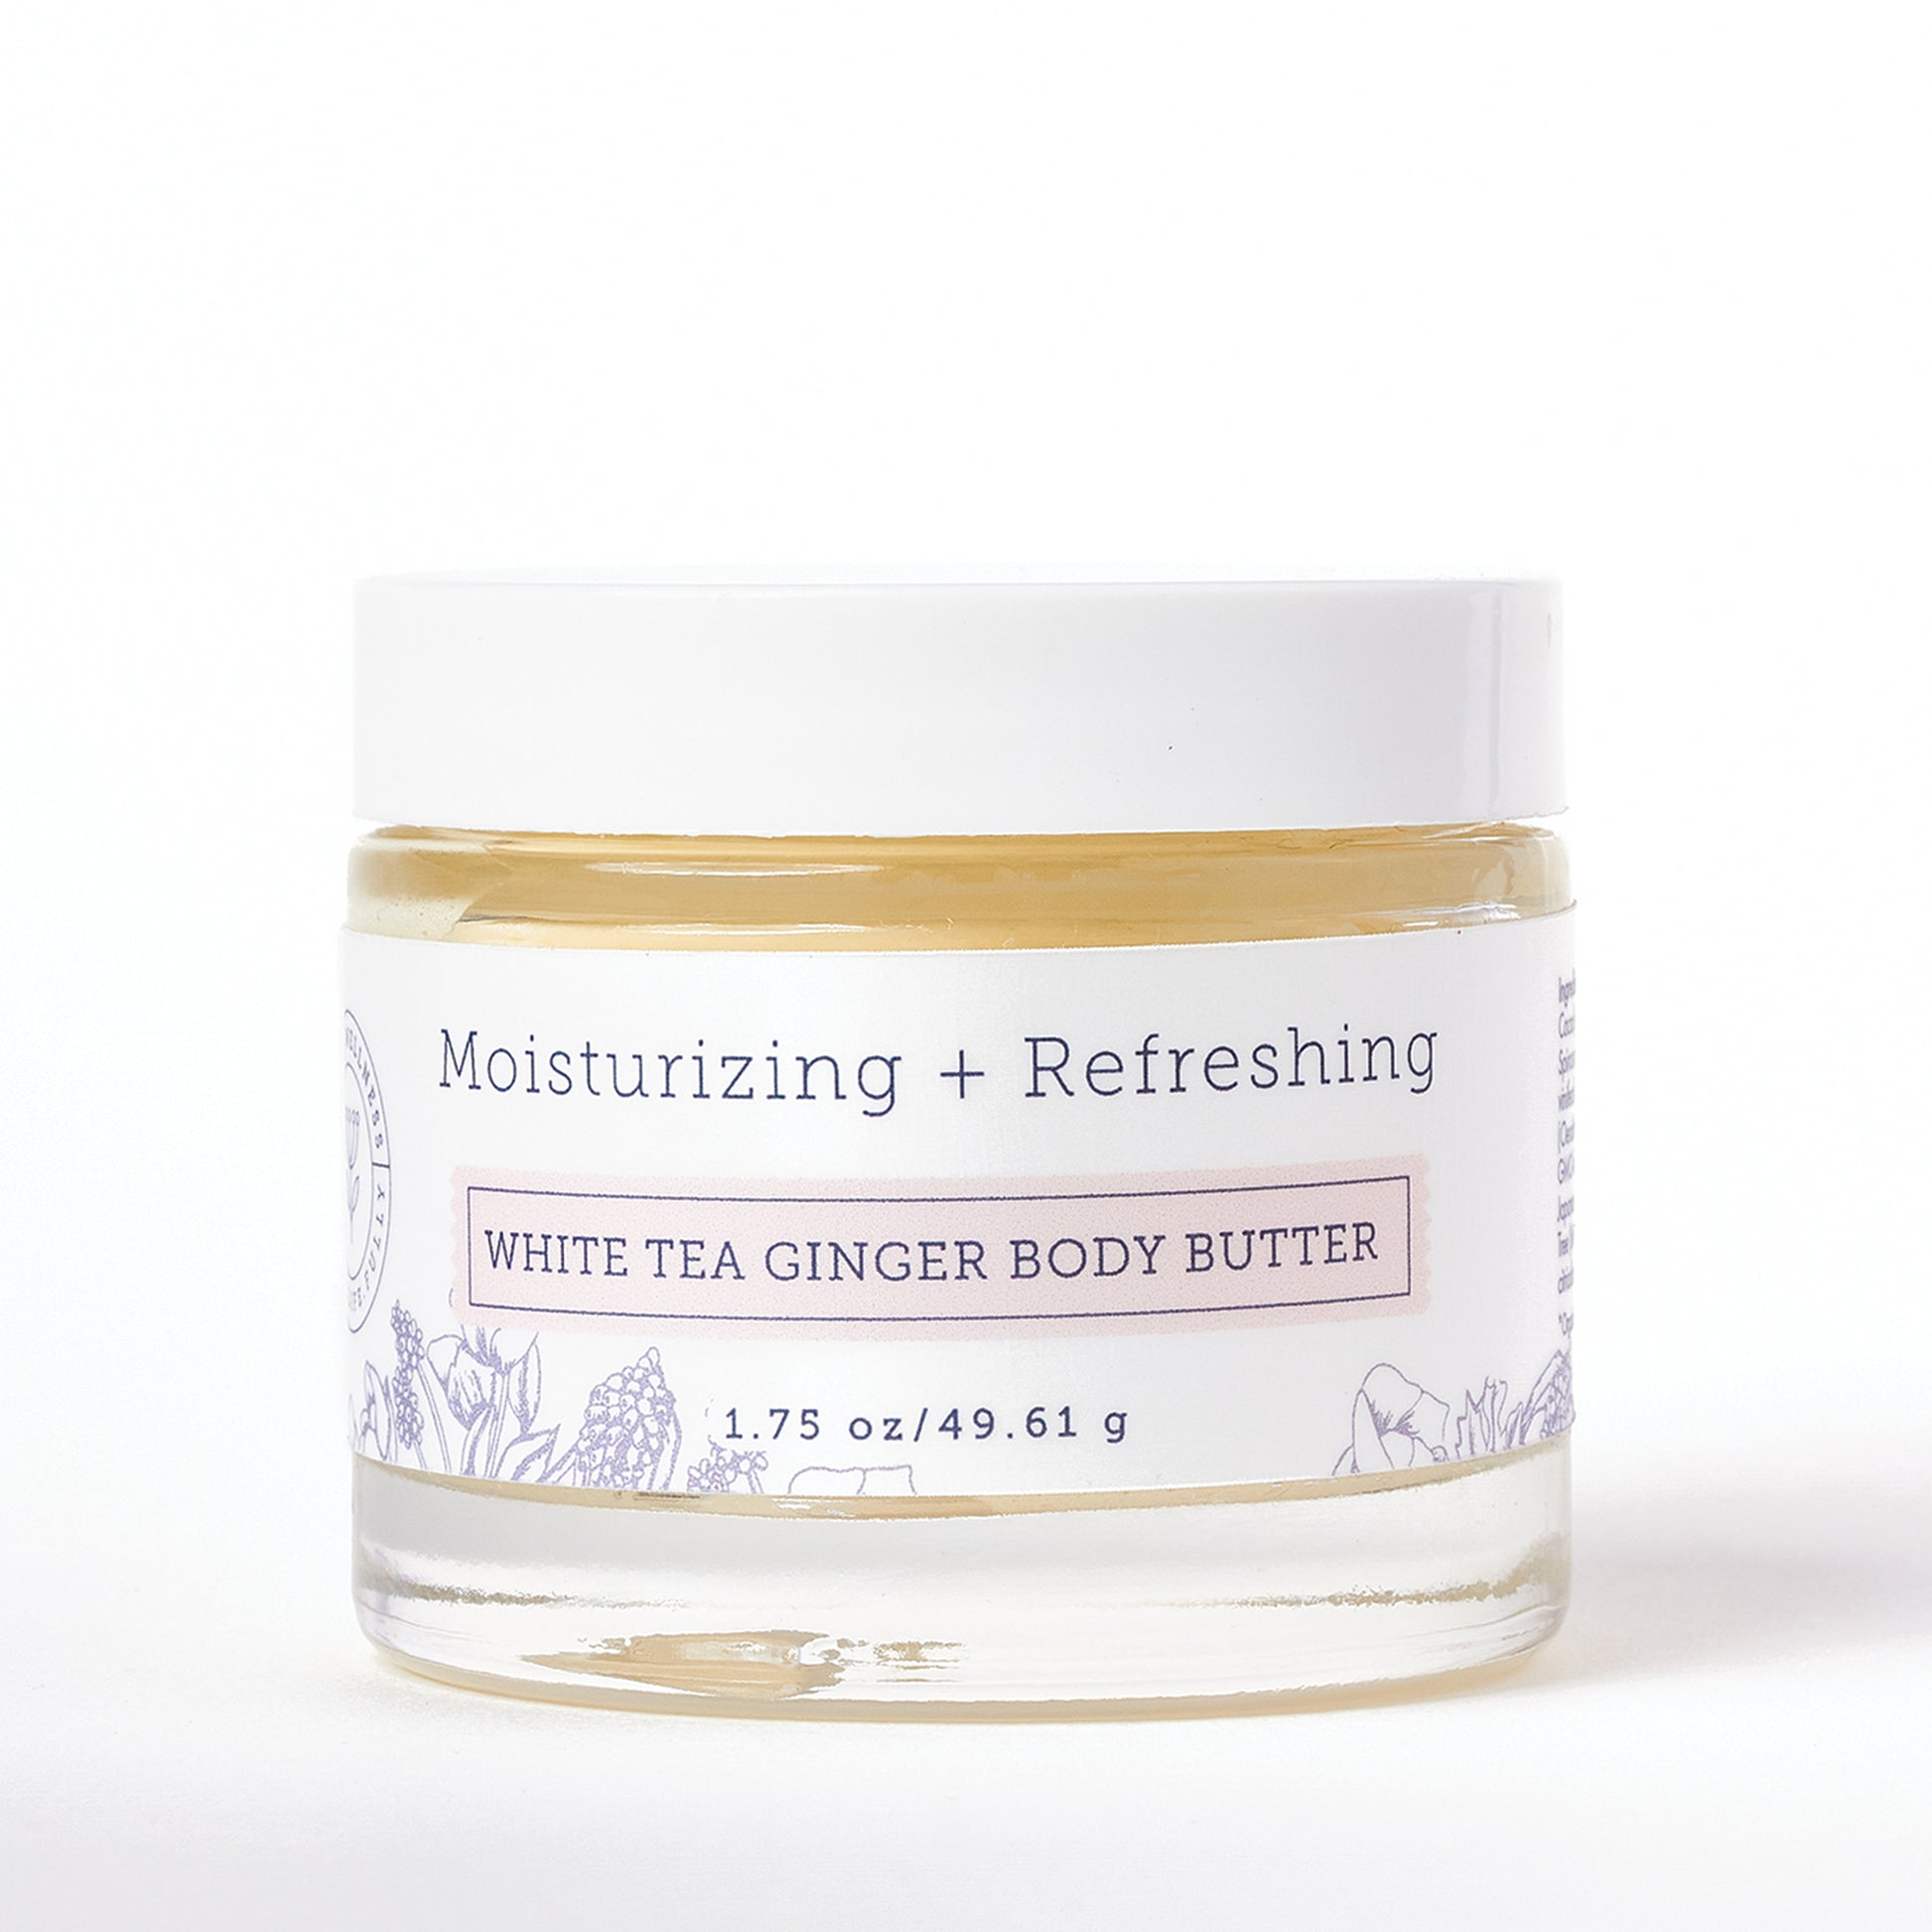 1.75 oz Refreshing Body Butter by Hello Wellness.  Nourish & revitalize dry skin, for an even-looking complexion.